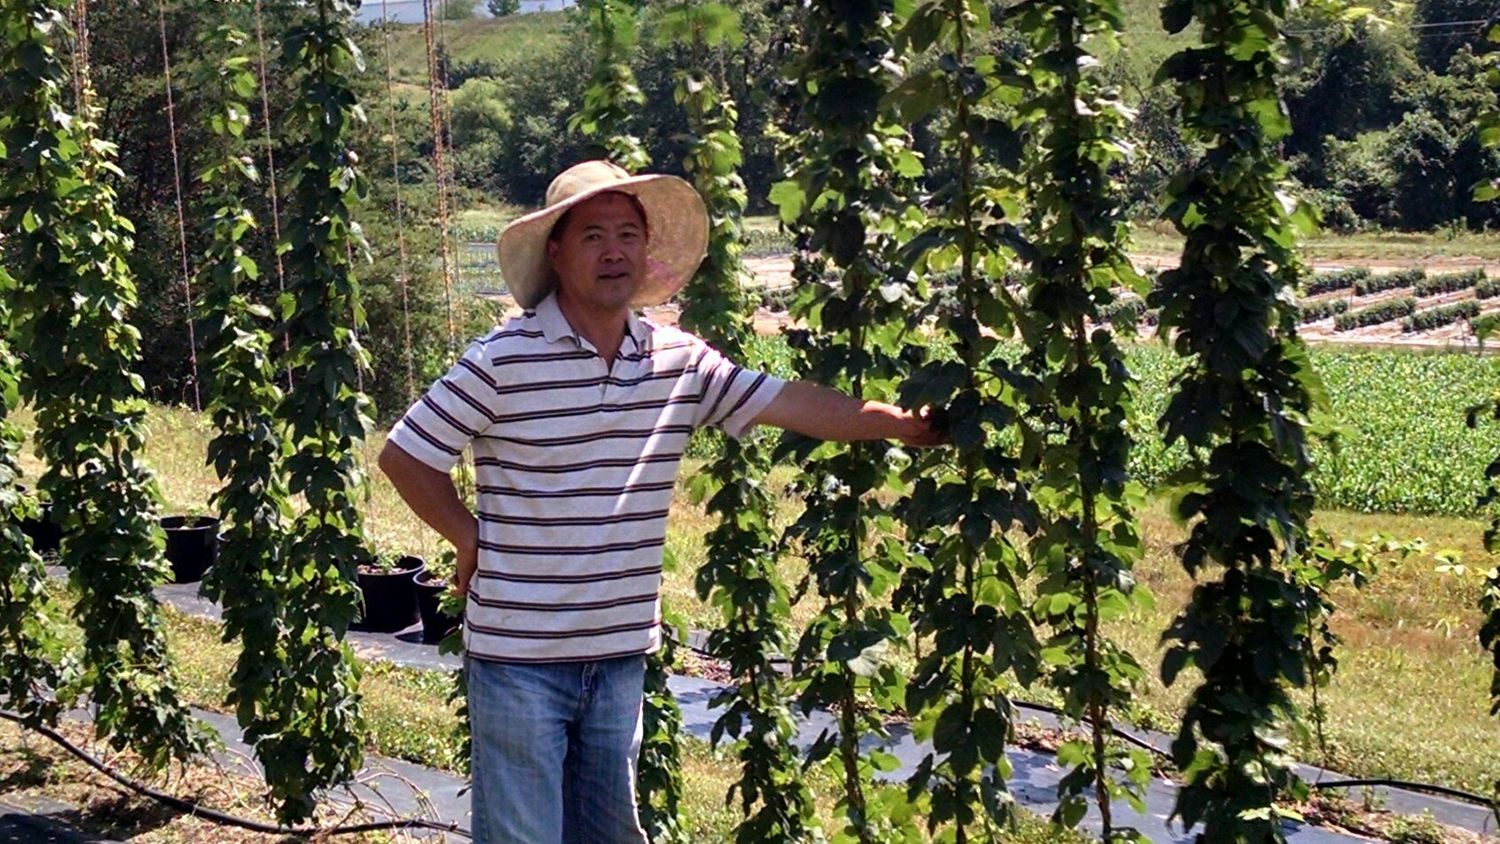 Faculty member standing by crops.